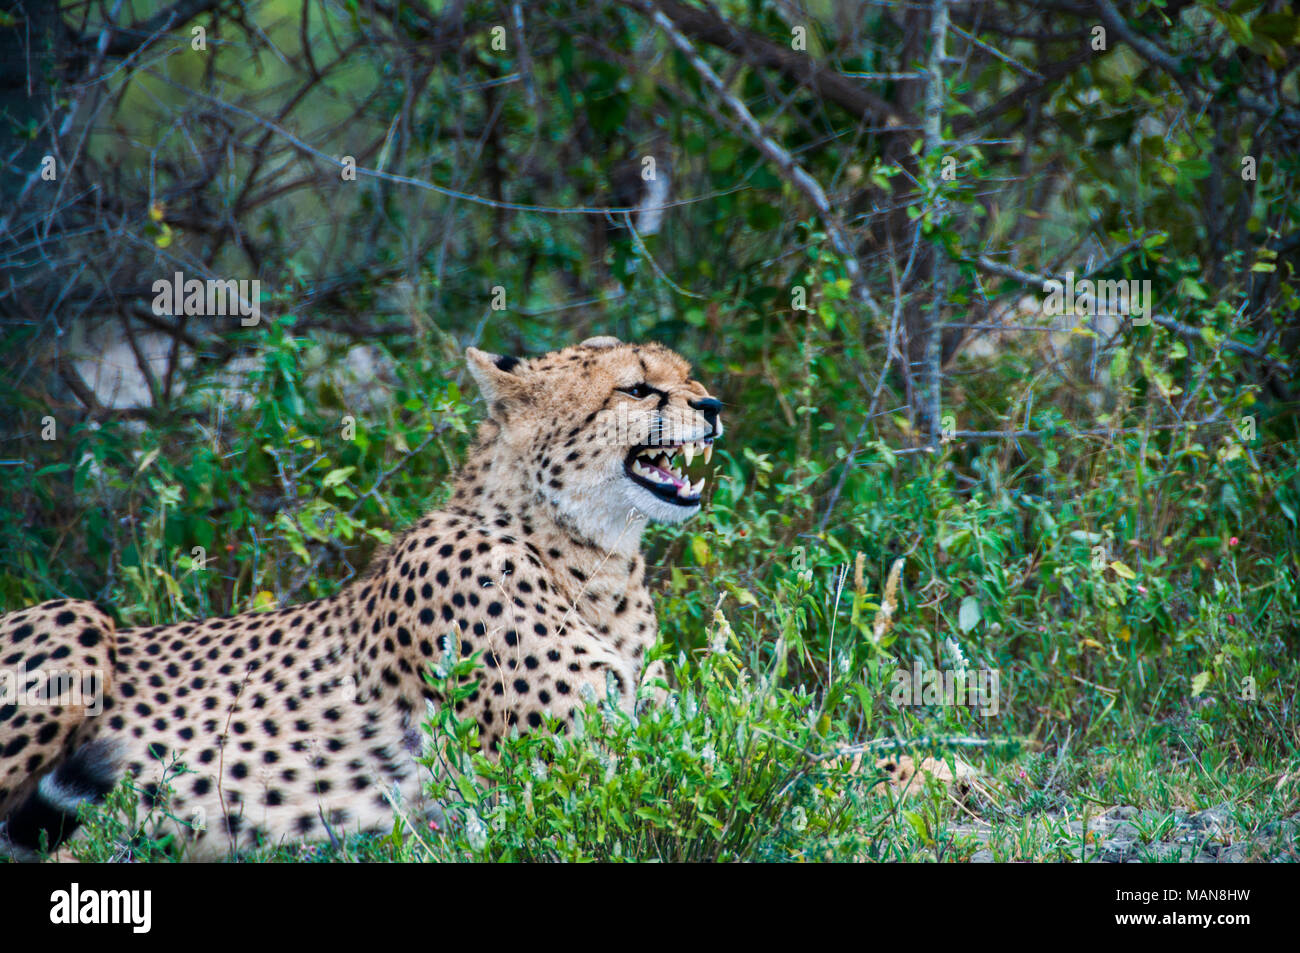 Rare photo of a cheetah with its mouth wide open, showing its teeth. Tanzania, Africa Stock Photo